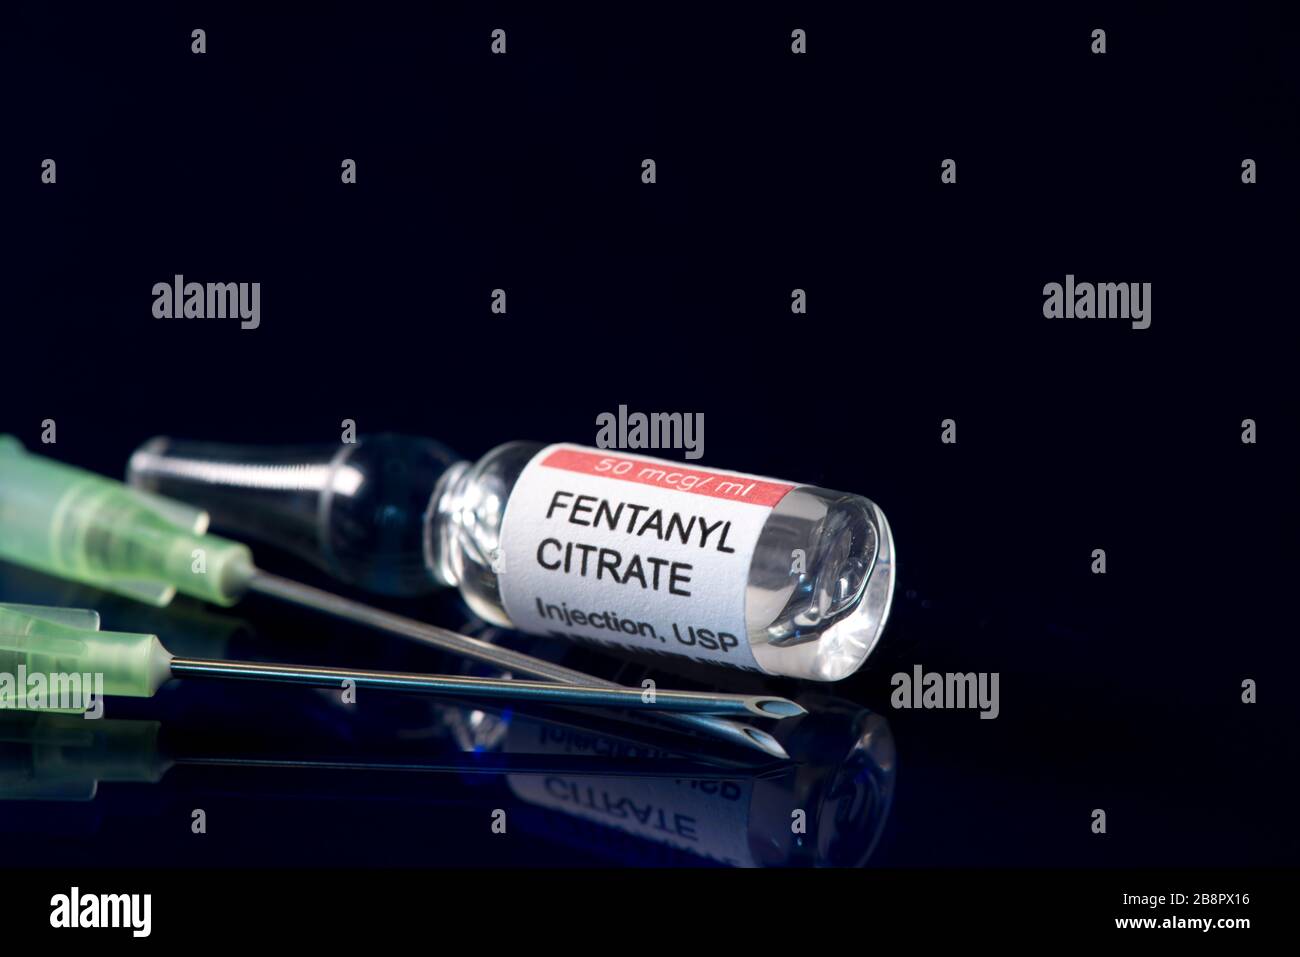 Fentanyl Citrate ampule with two filter syringe needles. Stock Photo